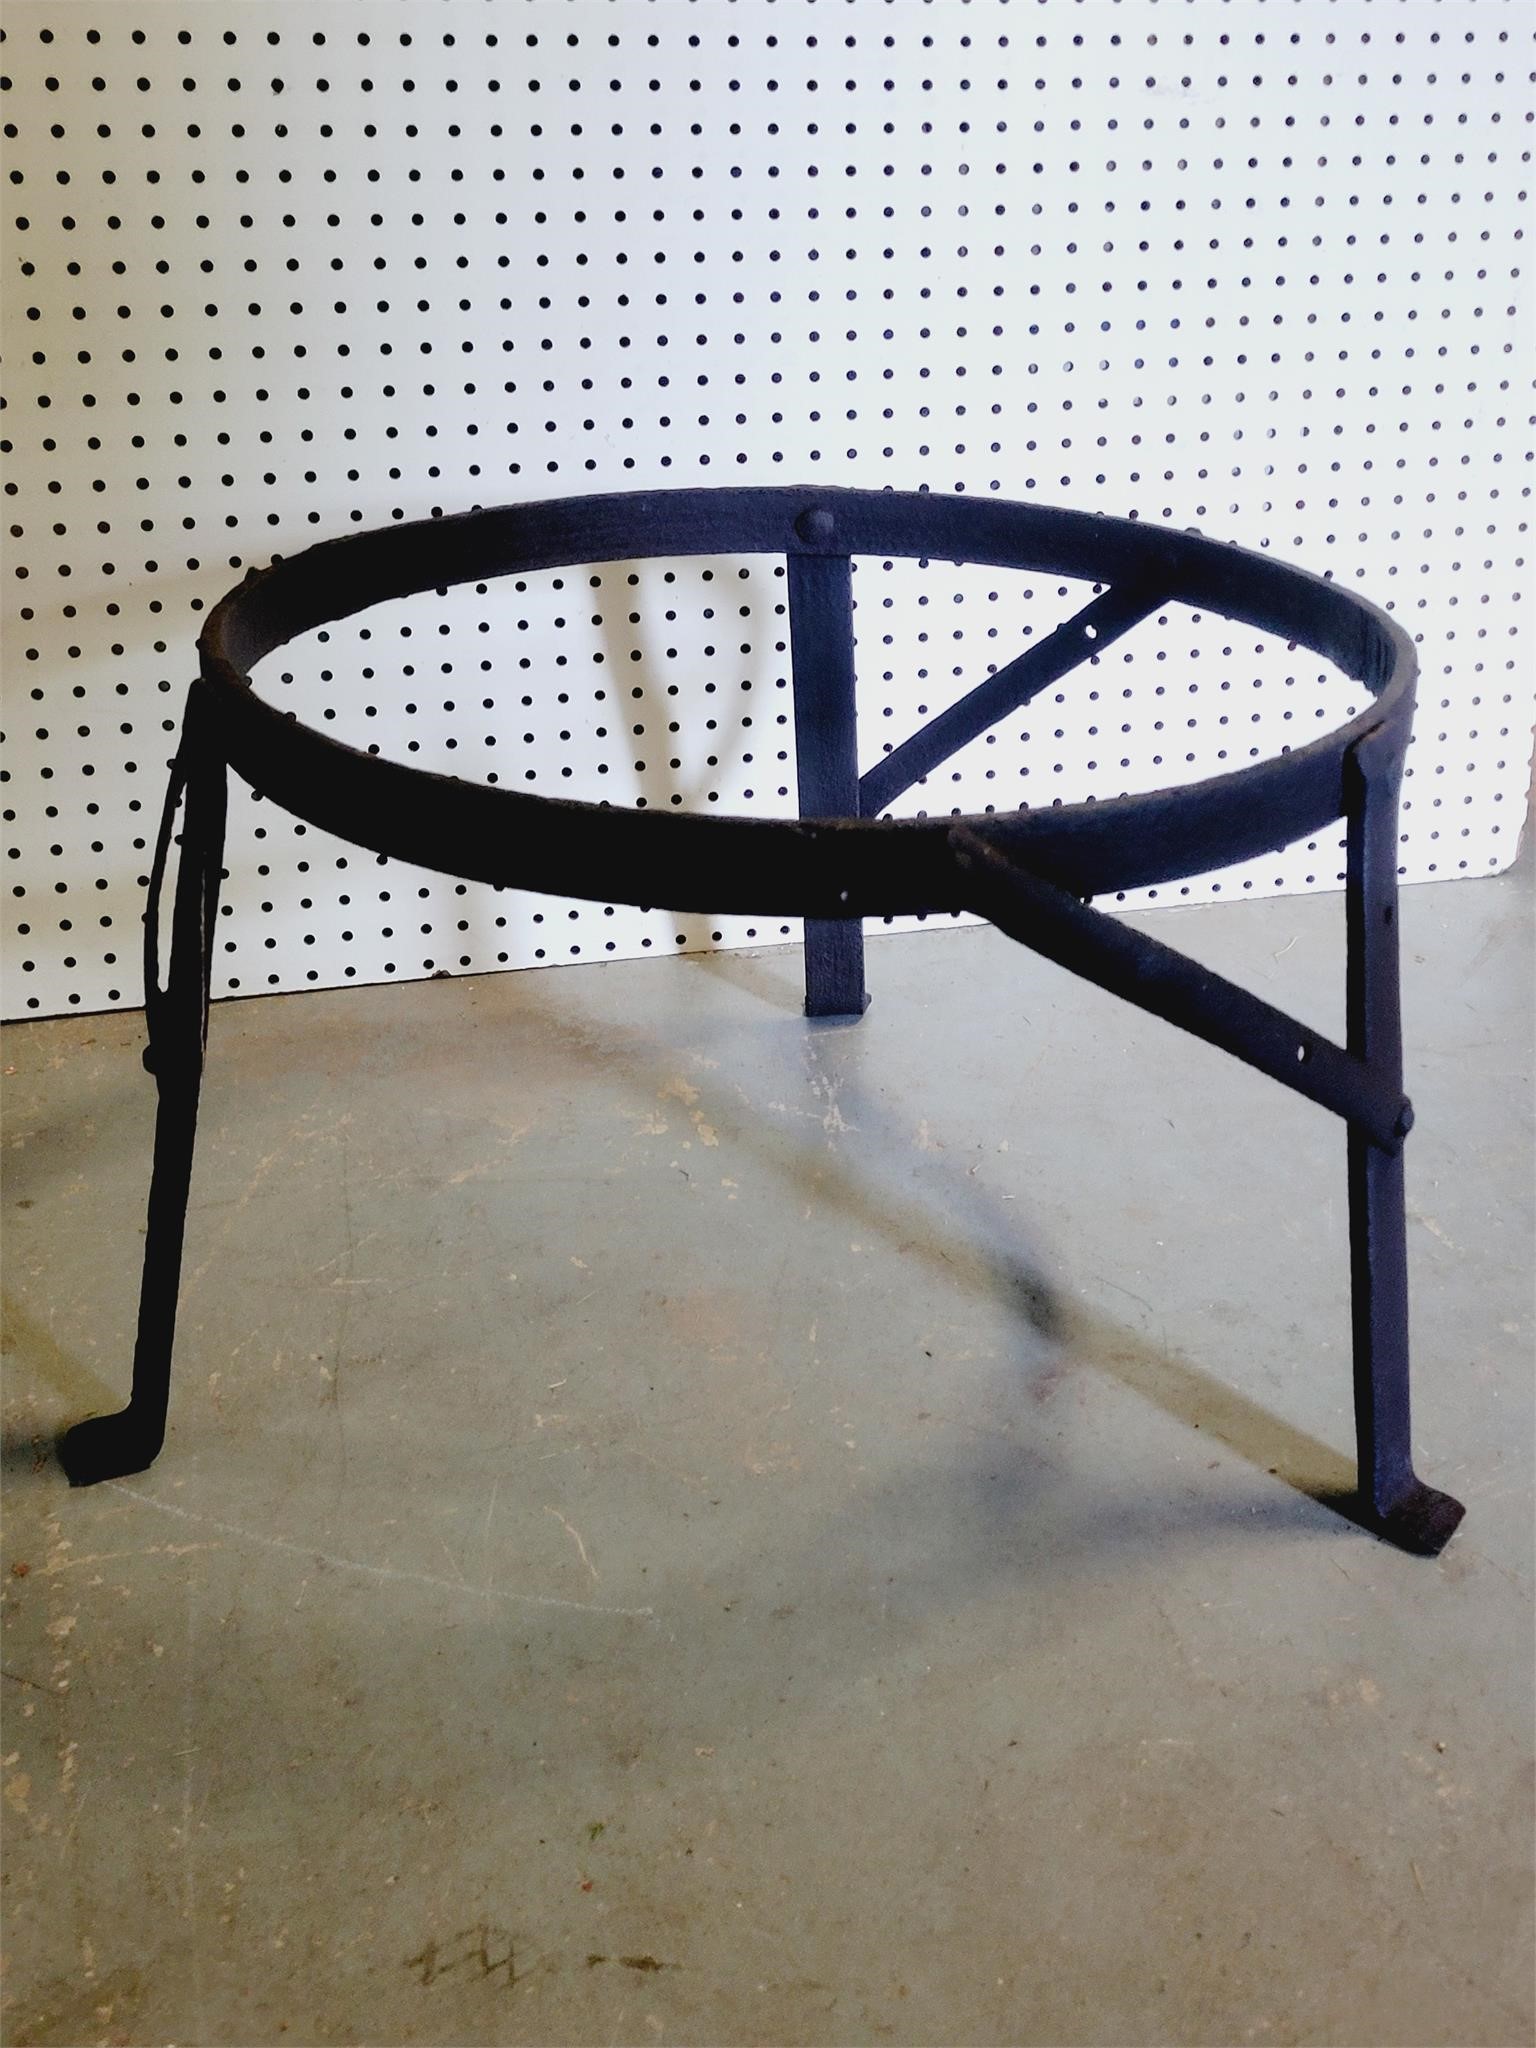 Cast Iron Kettle Stand